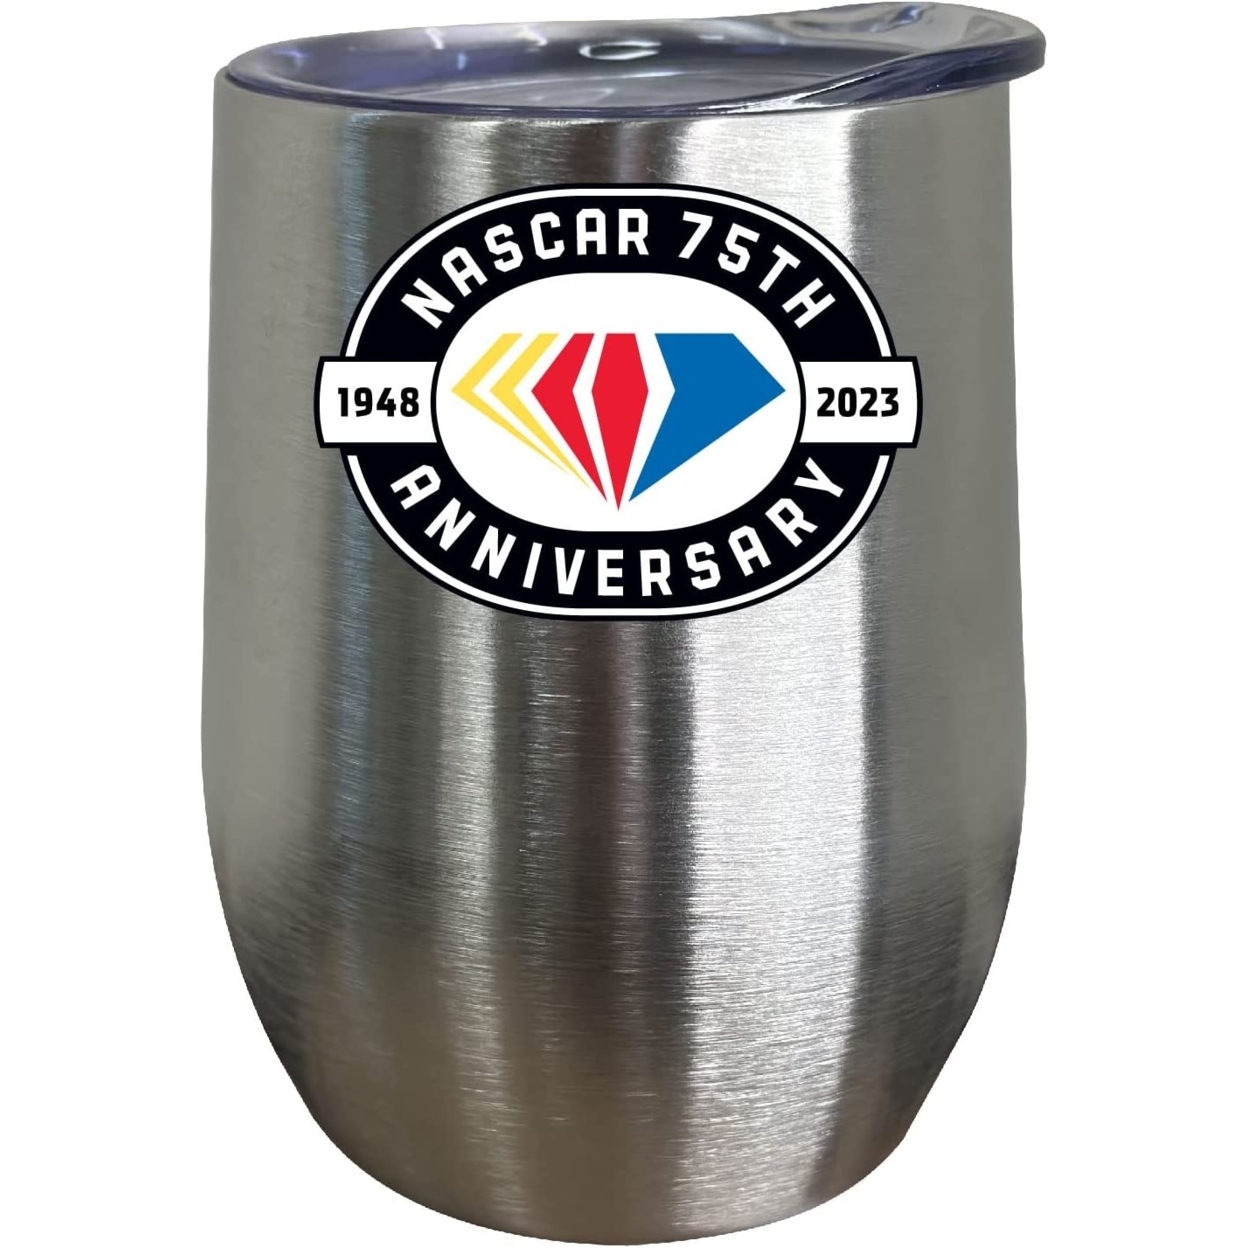 NASCAR 75 Year Anniversary Officially Licensed Insulated Wine Stainless Steel Tumbler